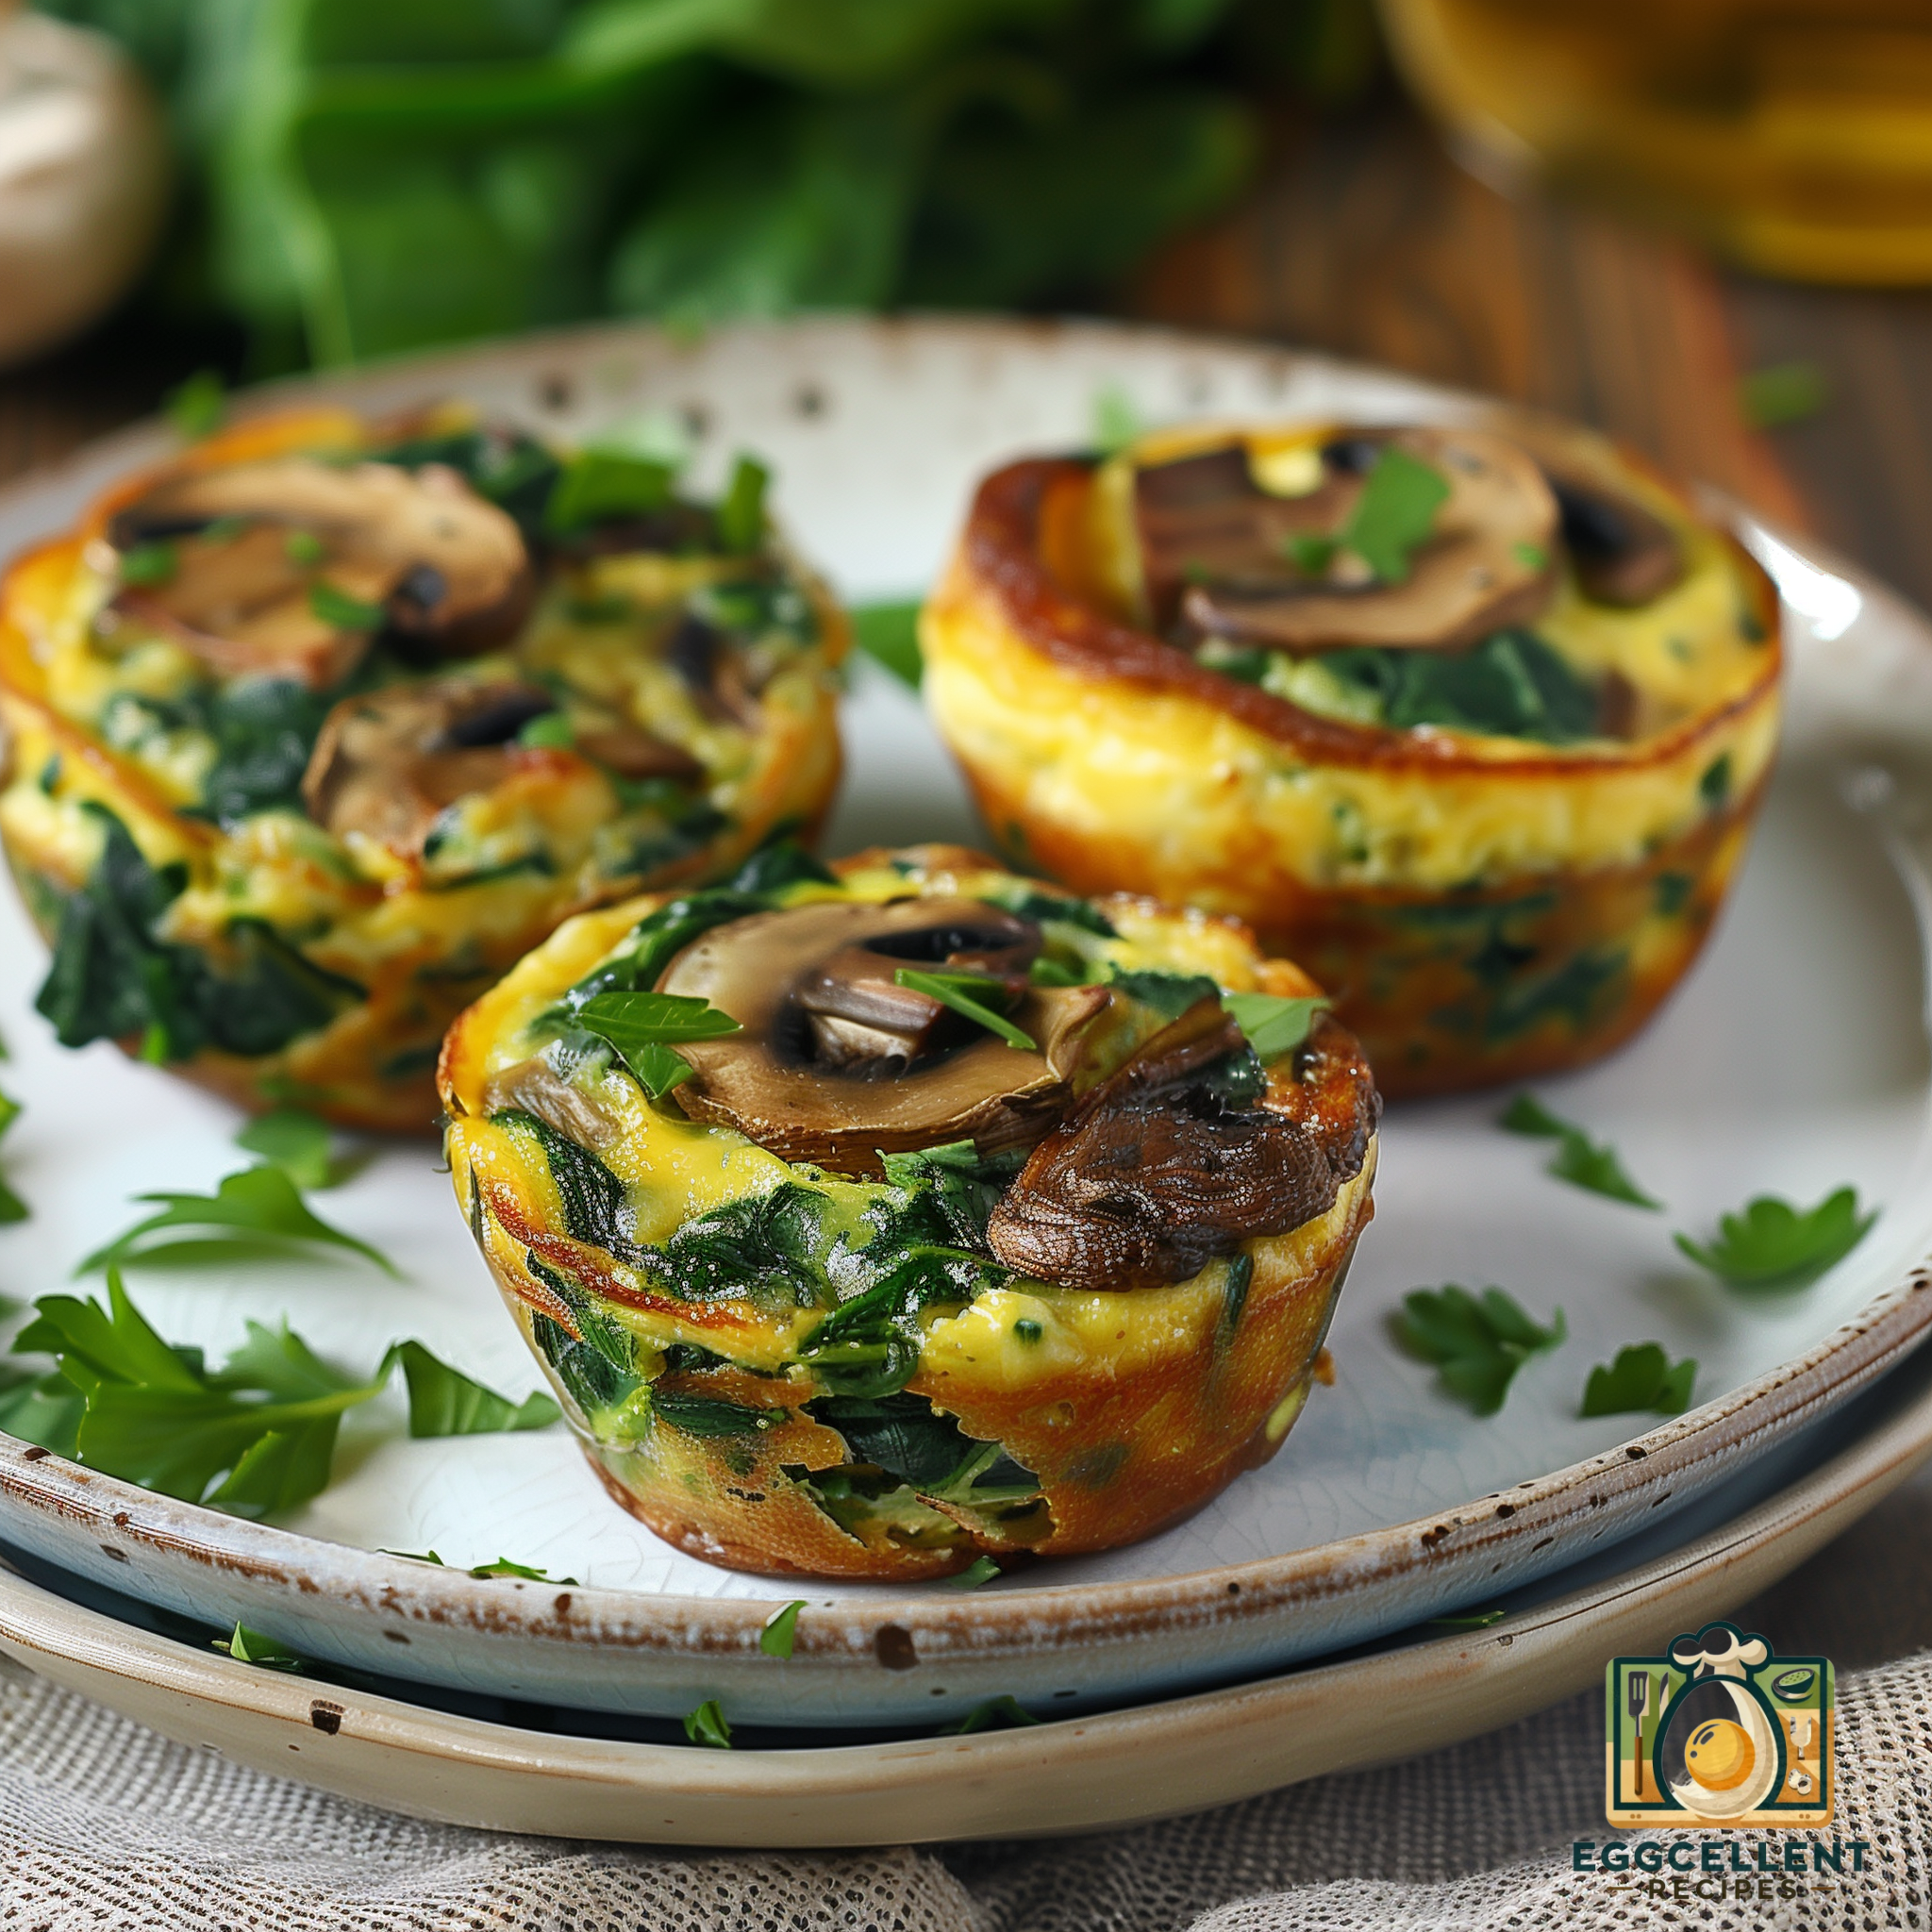 Spinach and Mushroom Egg Muffins Recipe